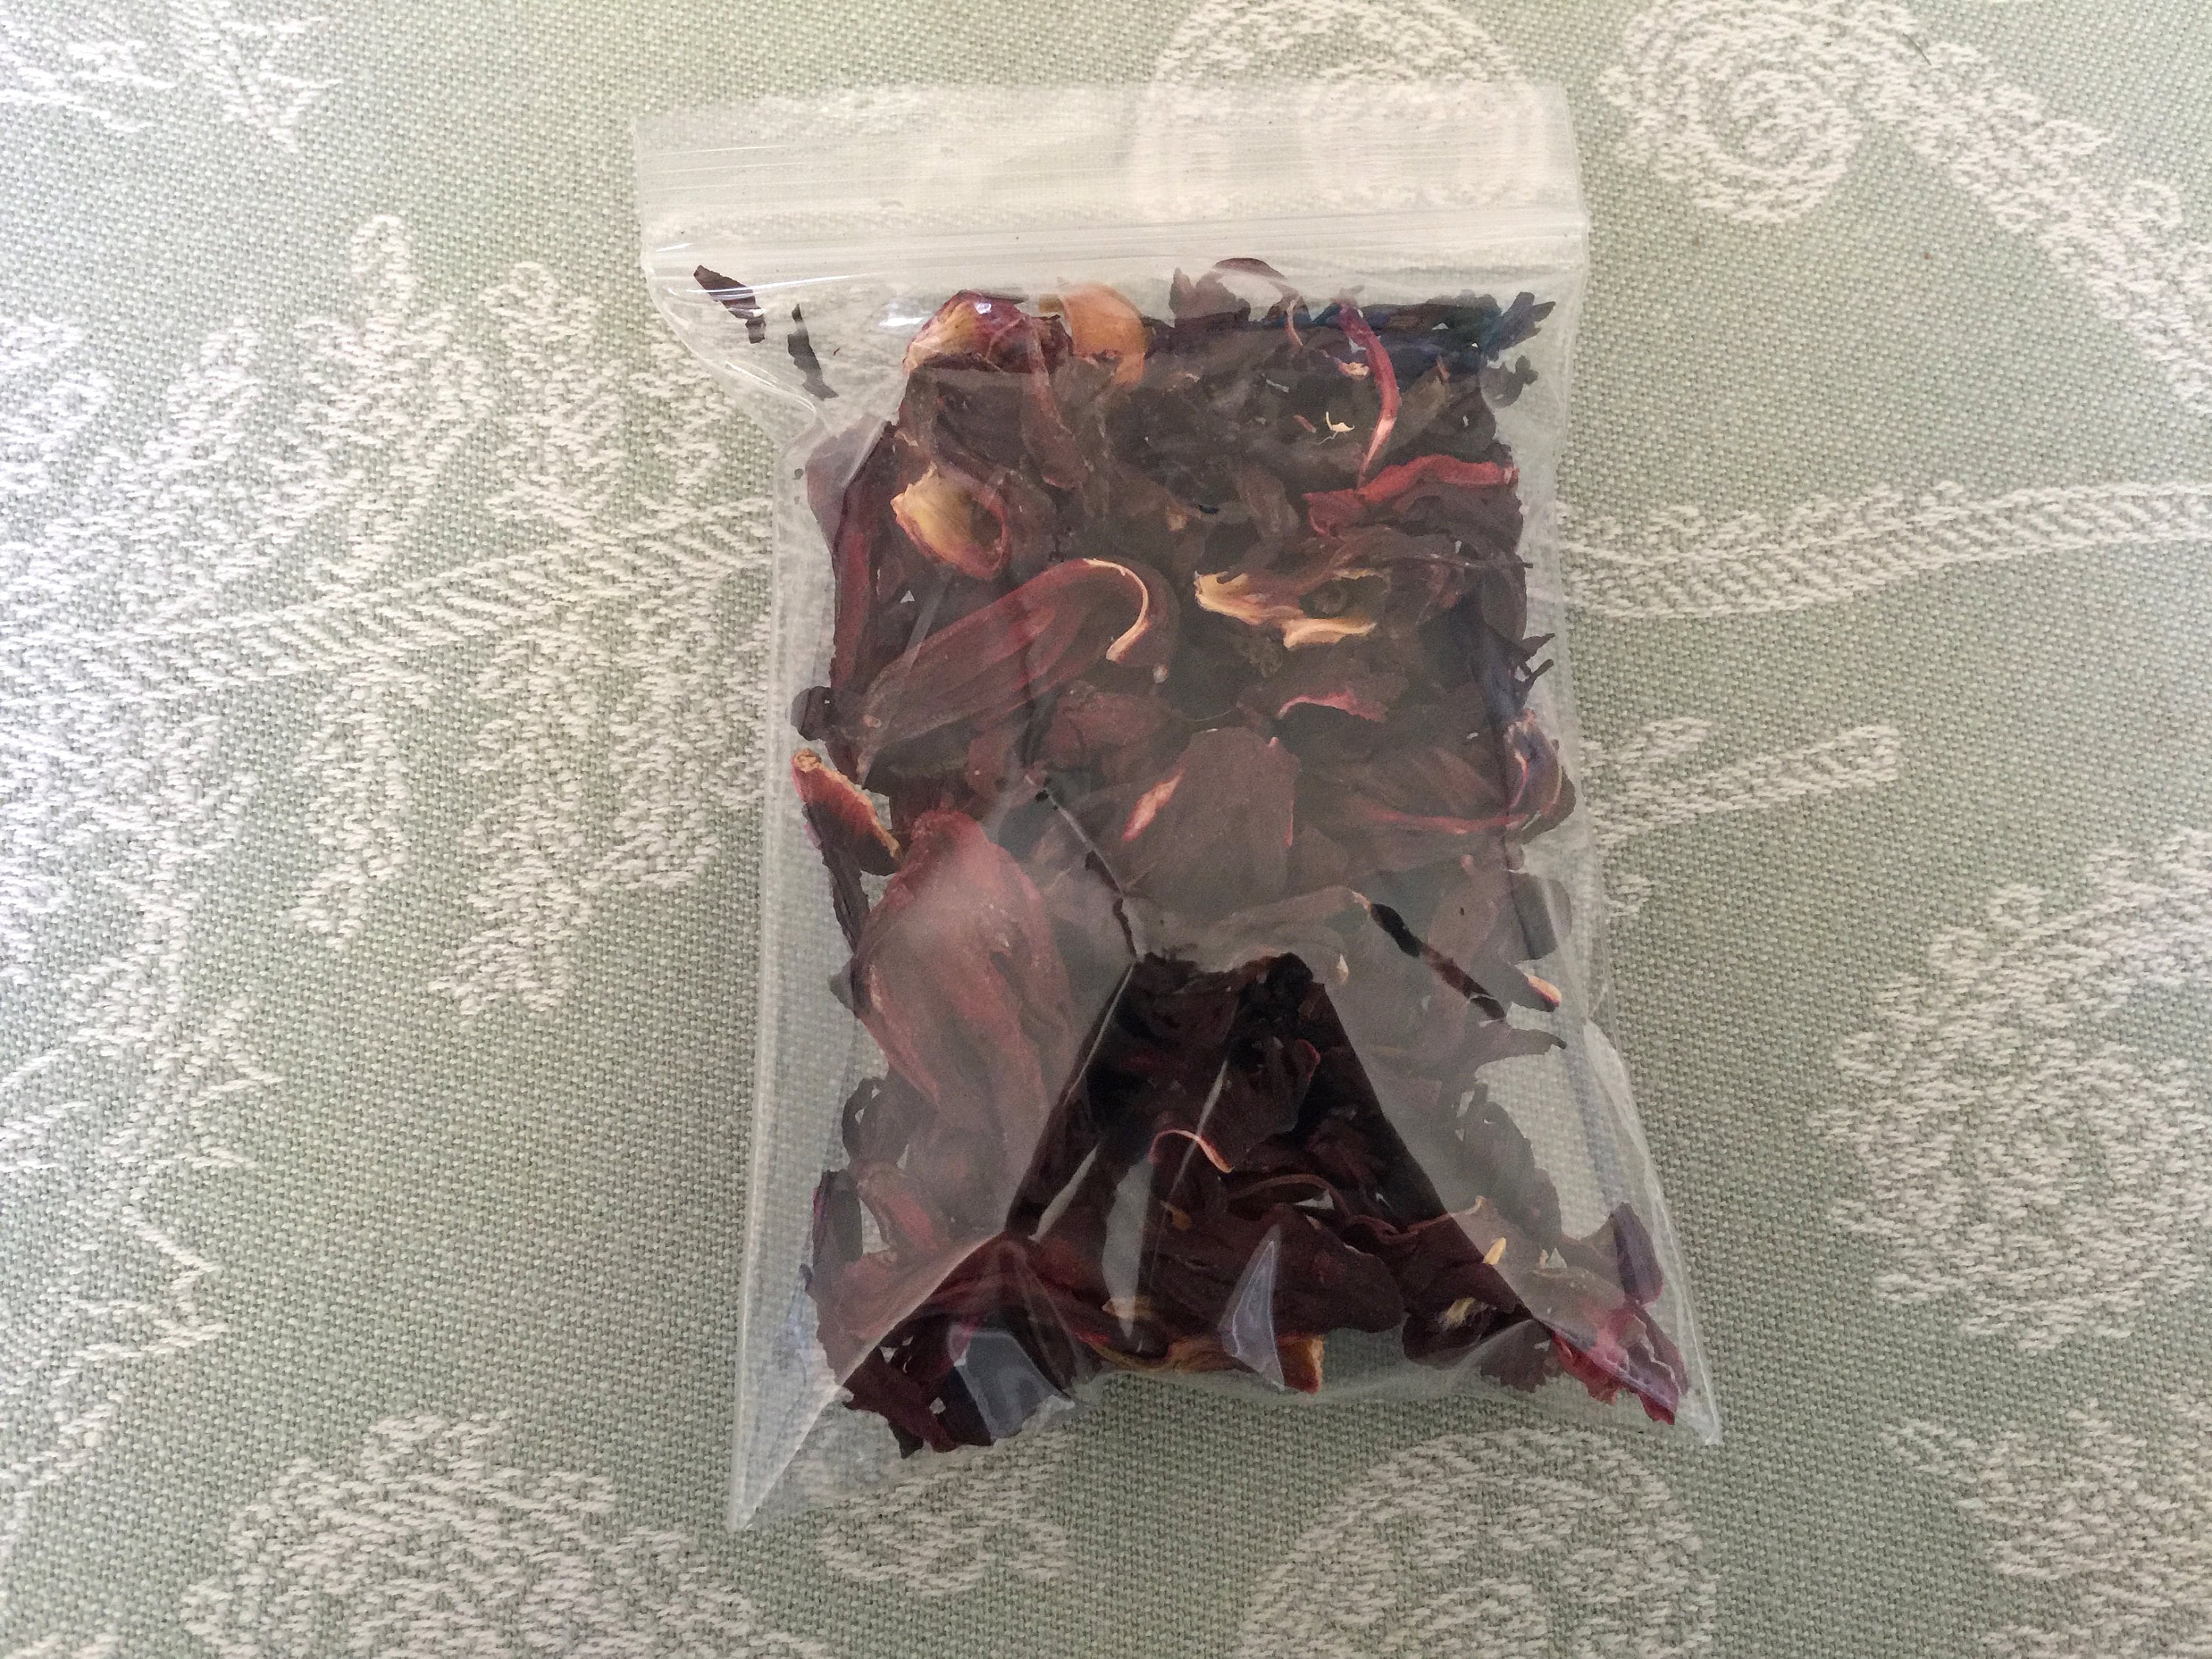 Organic Dried Hibiscus for chinchillas